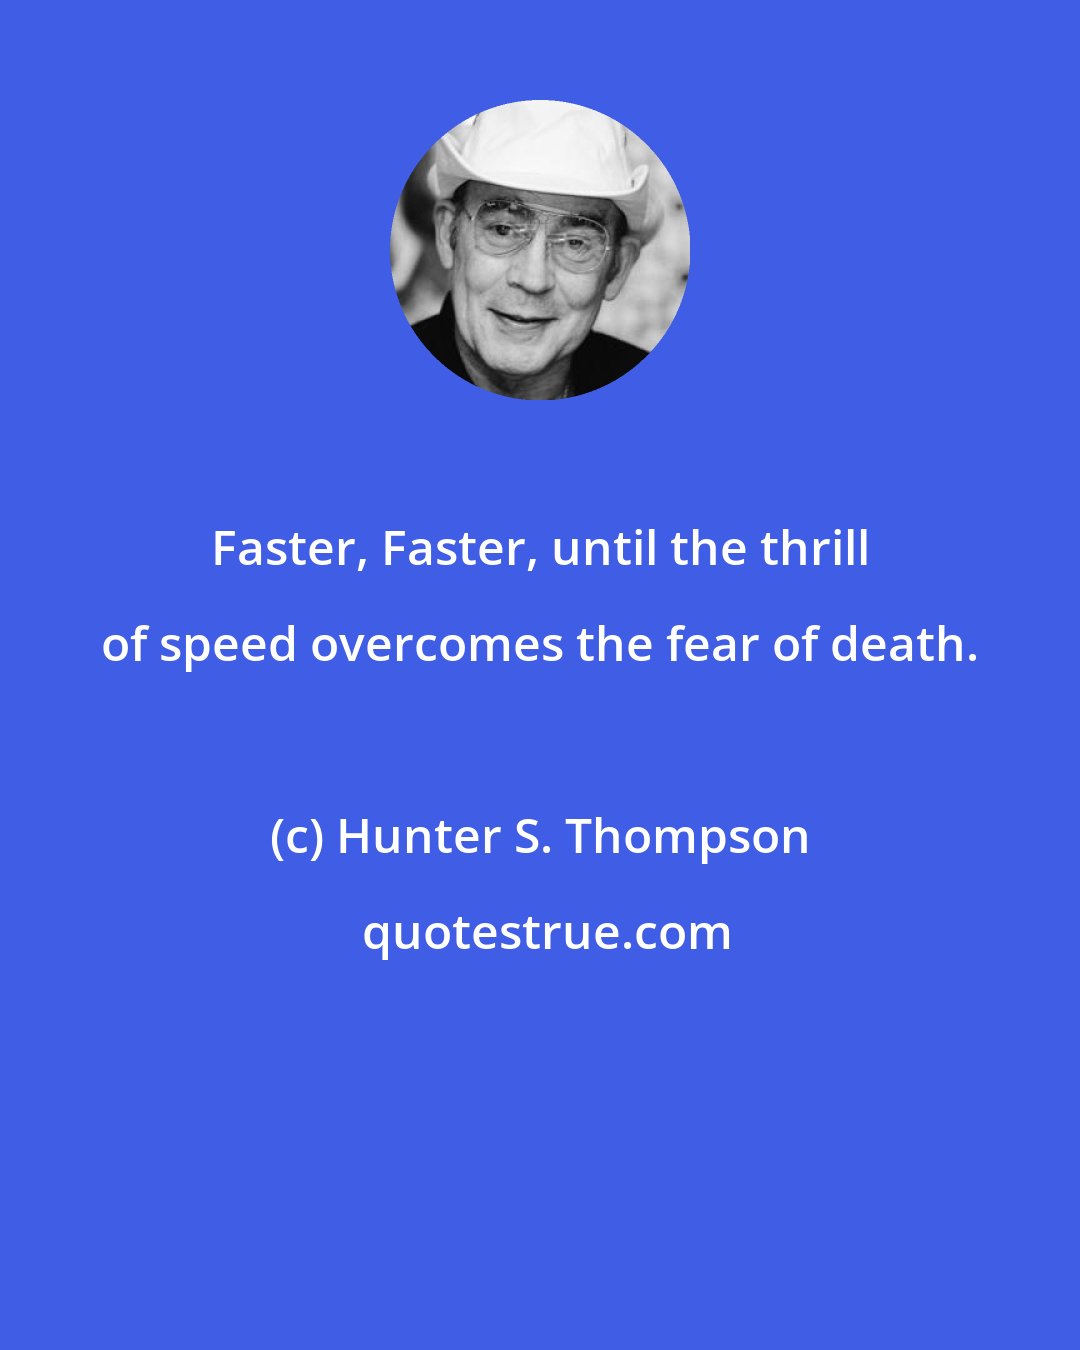 Hunter S. Thompson: Faster, Faster, until the thrill of speed overcomes the fear of death.